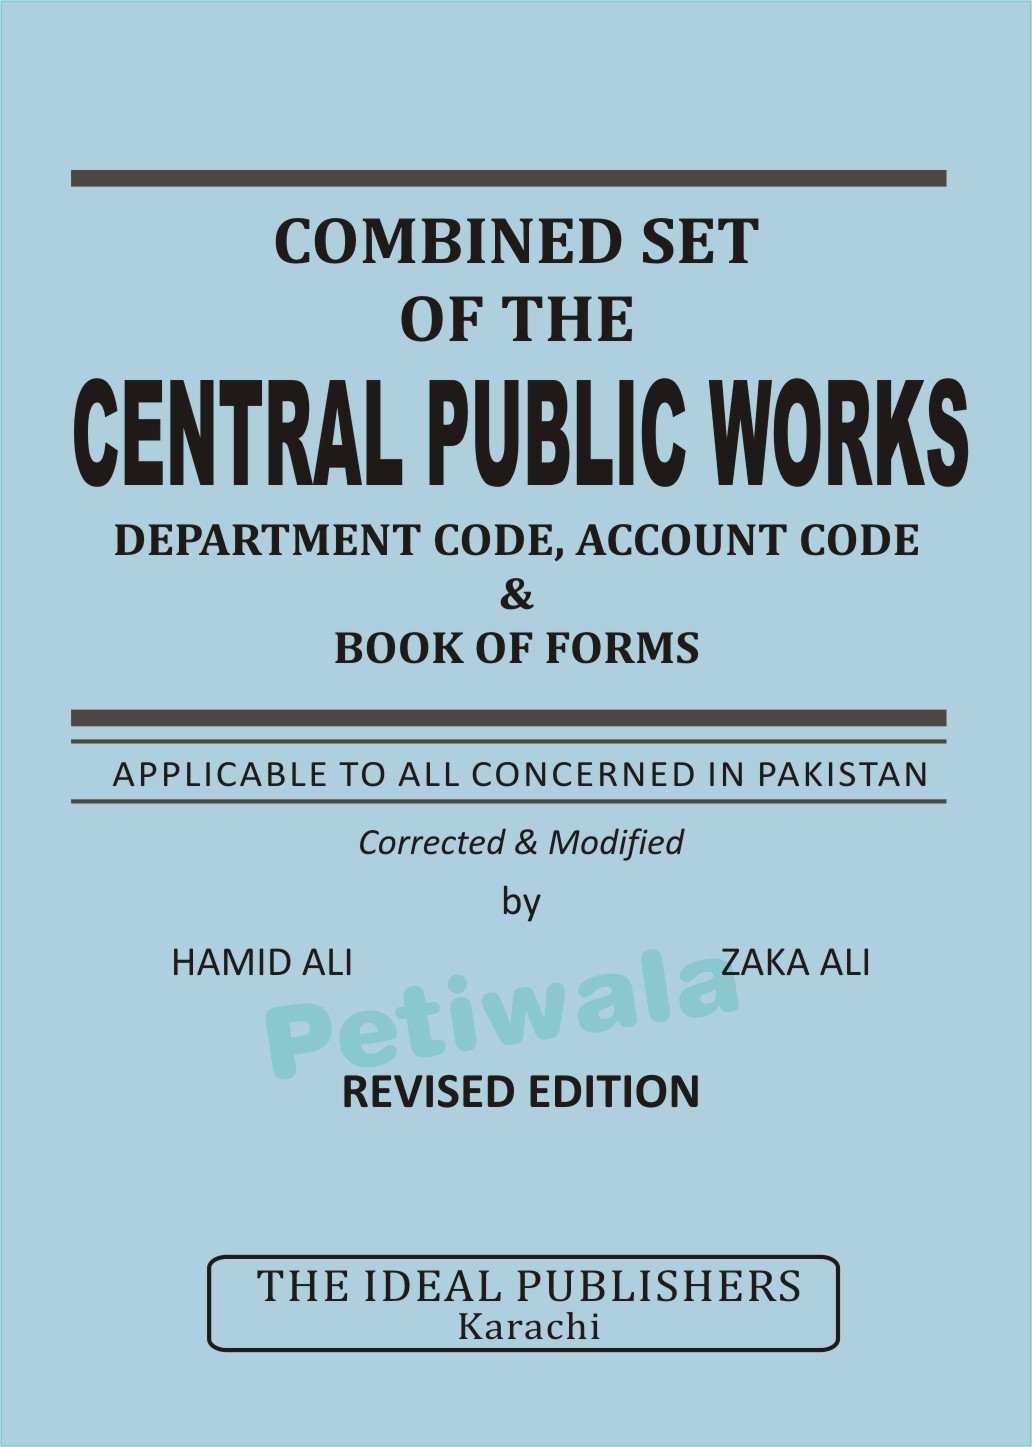 Central Public Works [Department Code, Account Code & Book of Forms]